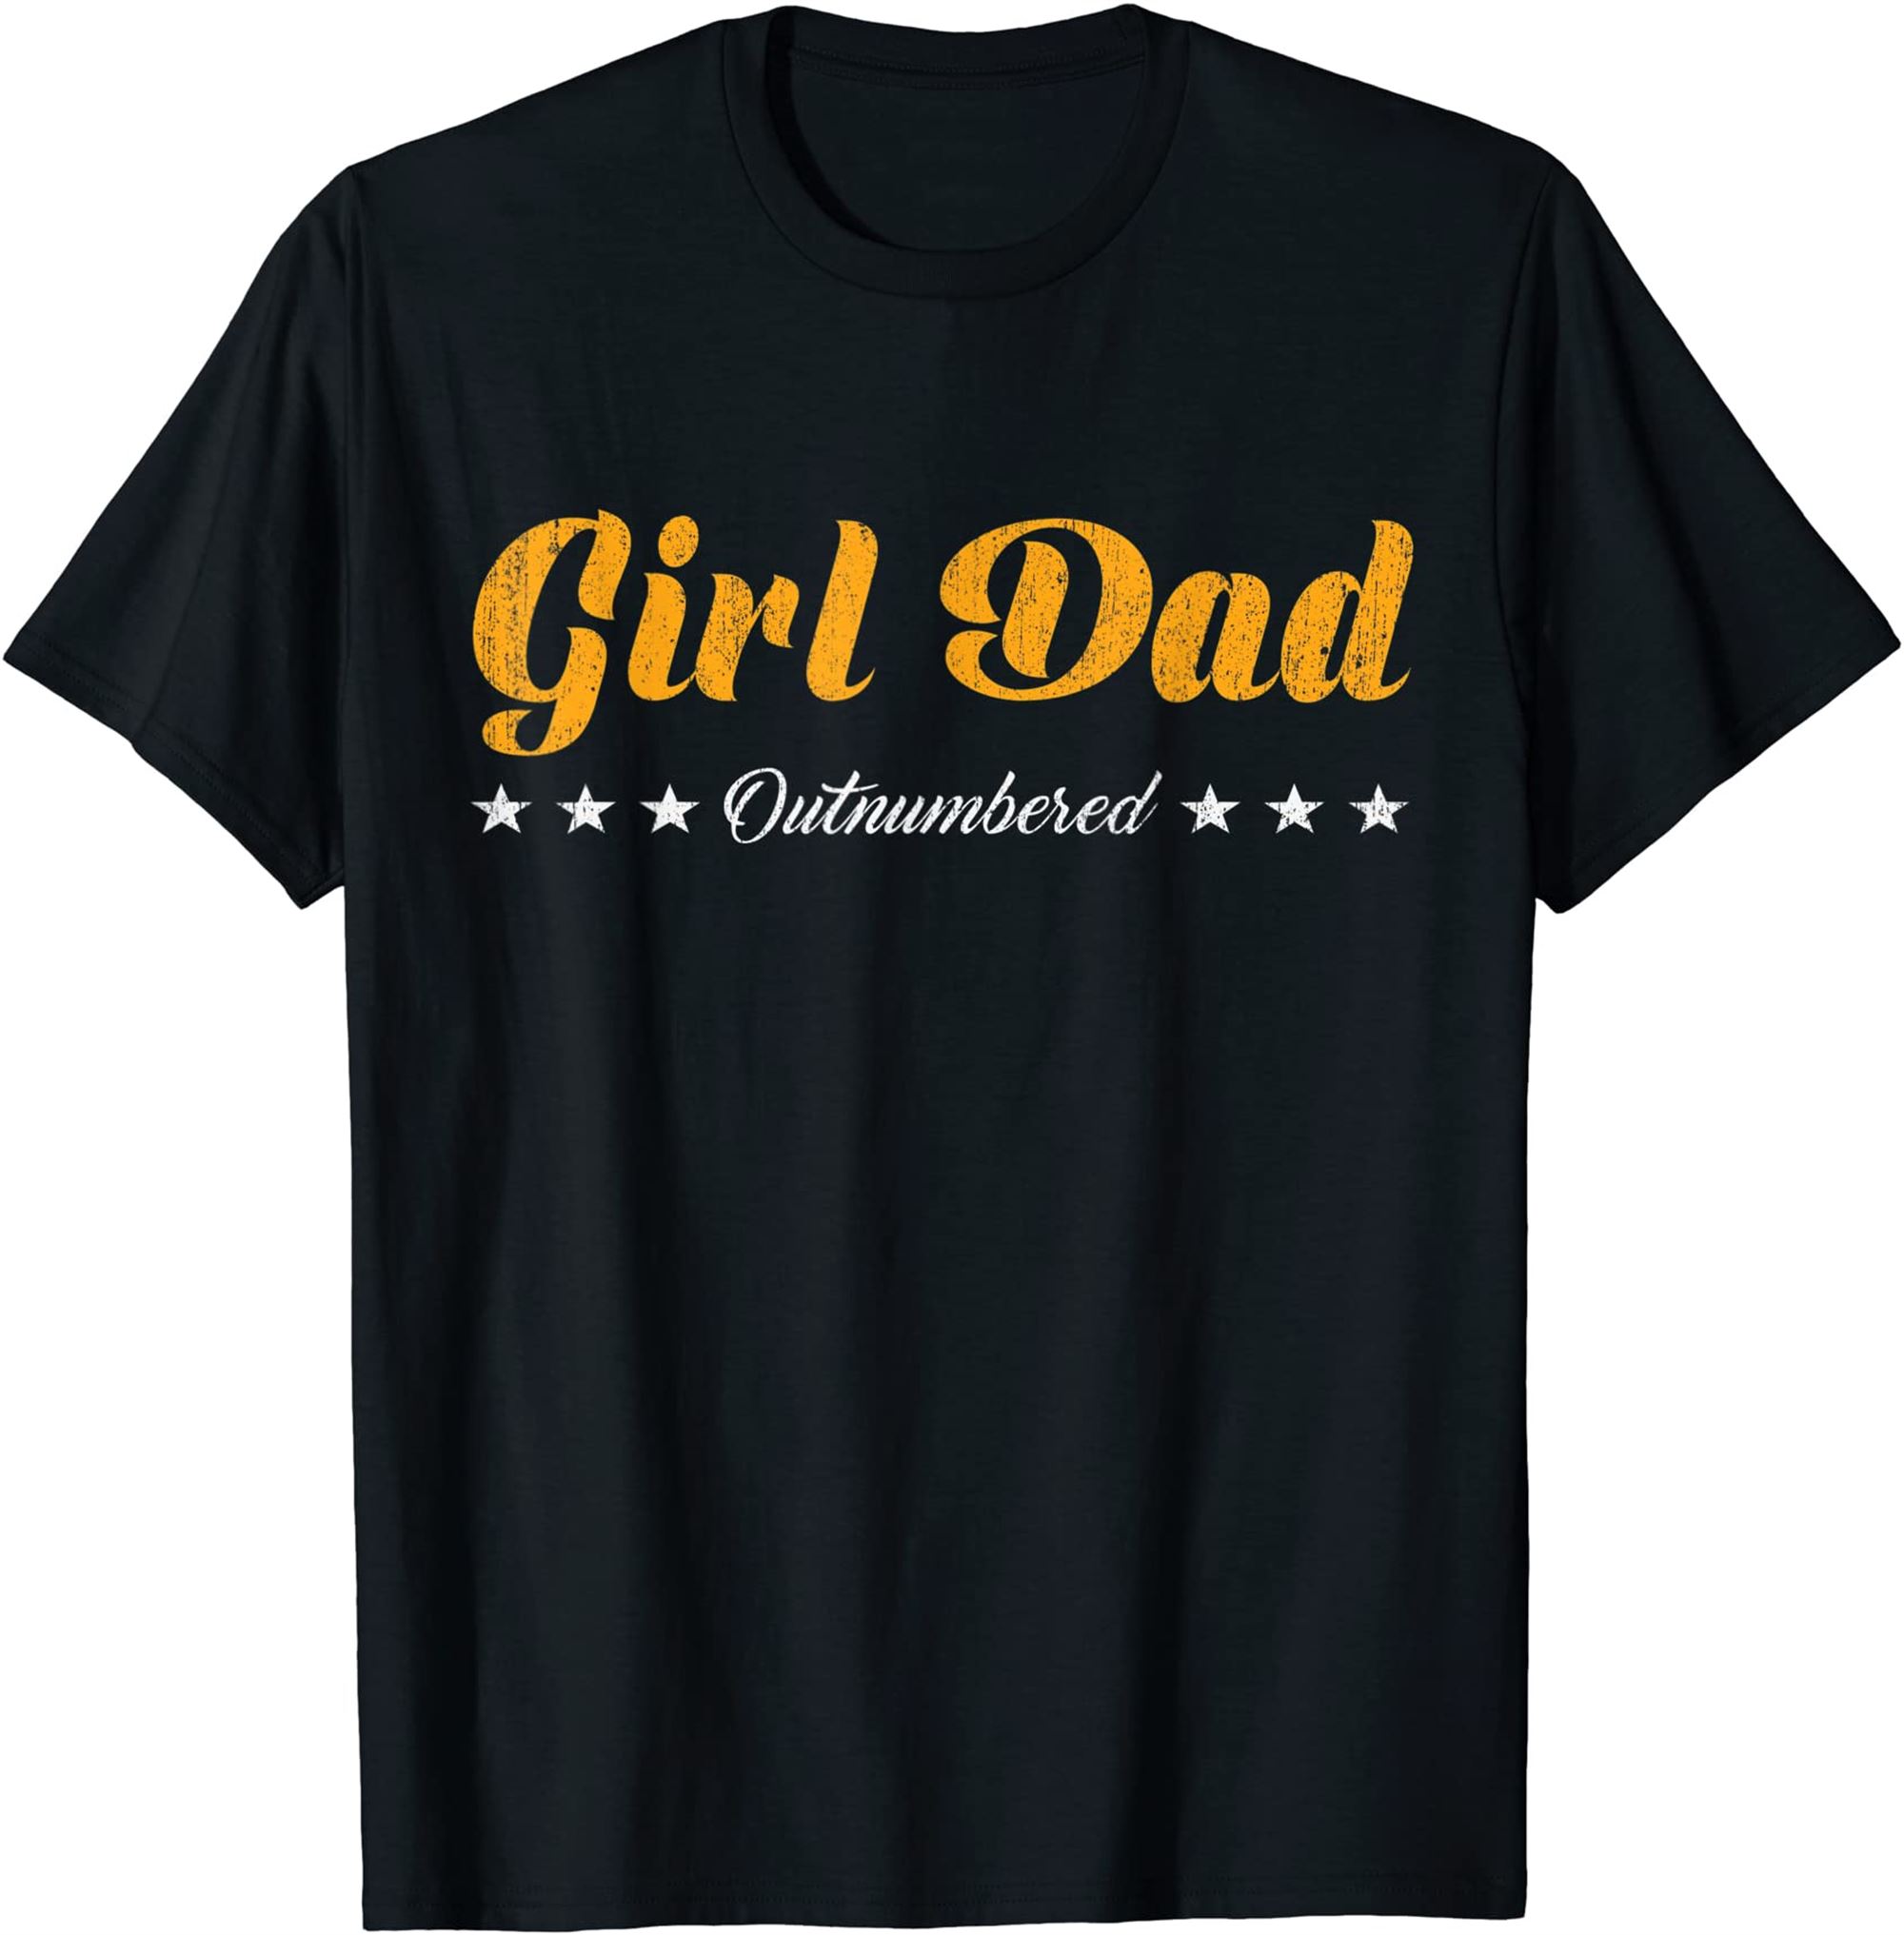 Retro Stars Girl Dad Outnumbered Fathers Day Wife Daughter T-shirt Full Size Up To 5xl